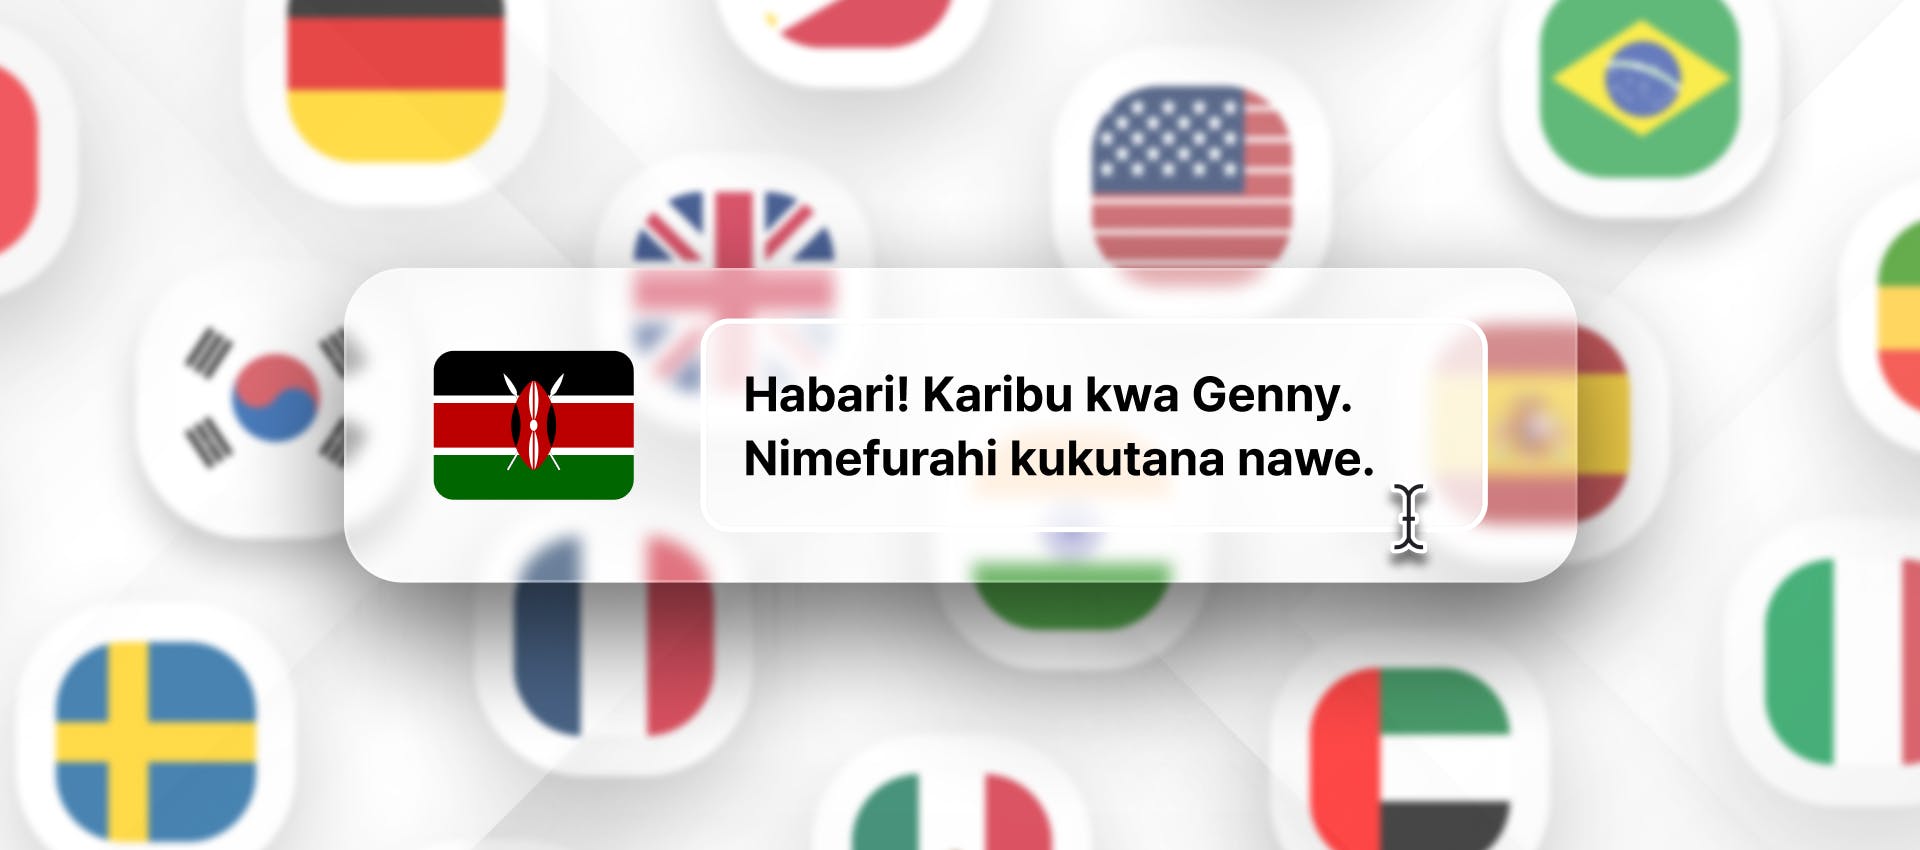 Swahili phrase for Swahili TTS generation with different flags in the background